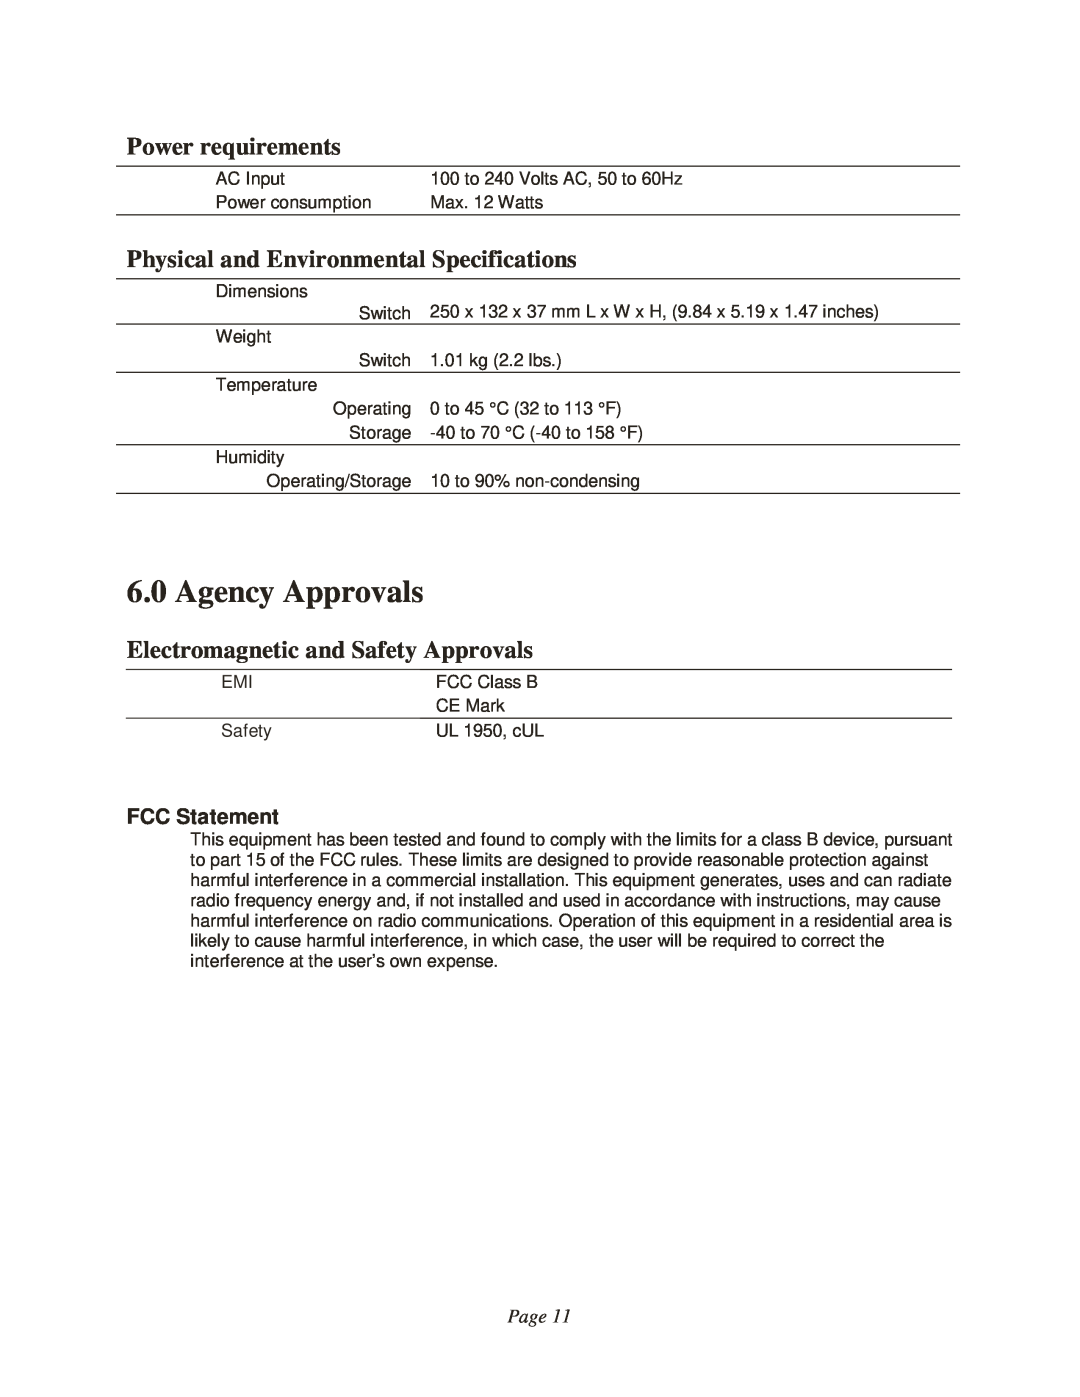 3M VOL-1081 manual Agency Approvals, Power requirements, Physical and Environmental Specifications, FCC Statement, Page 